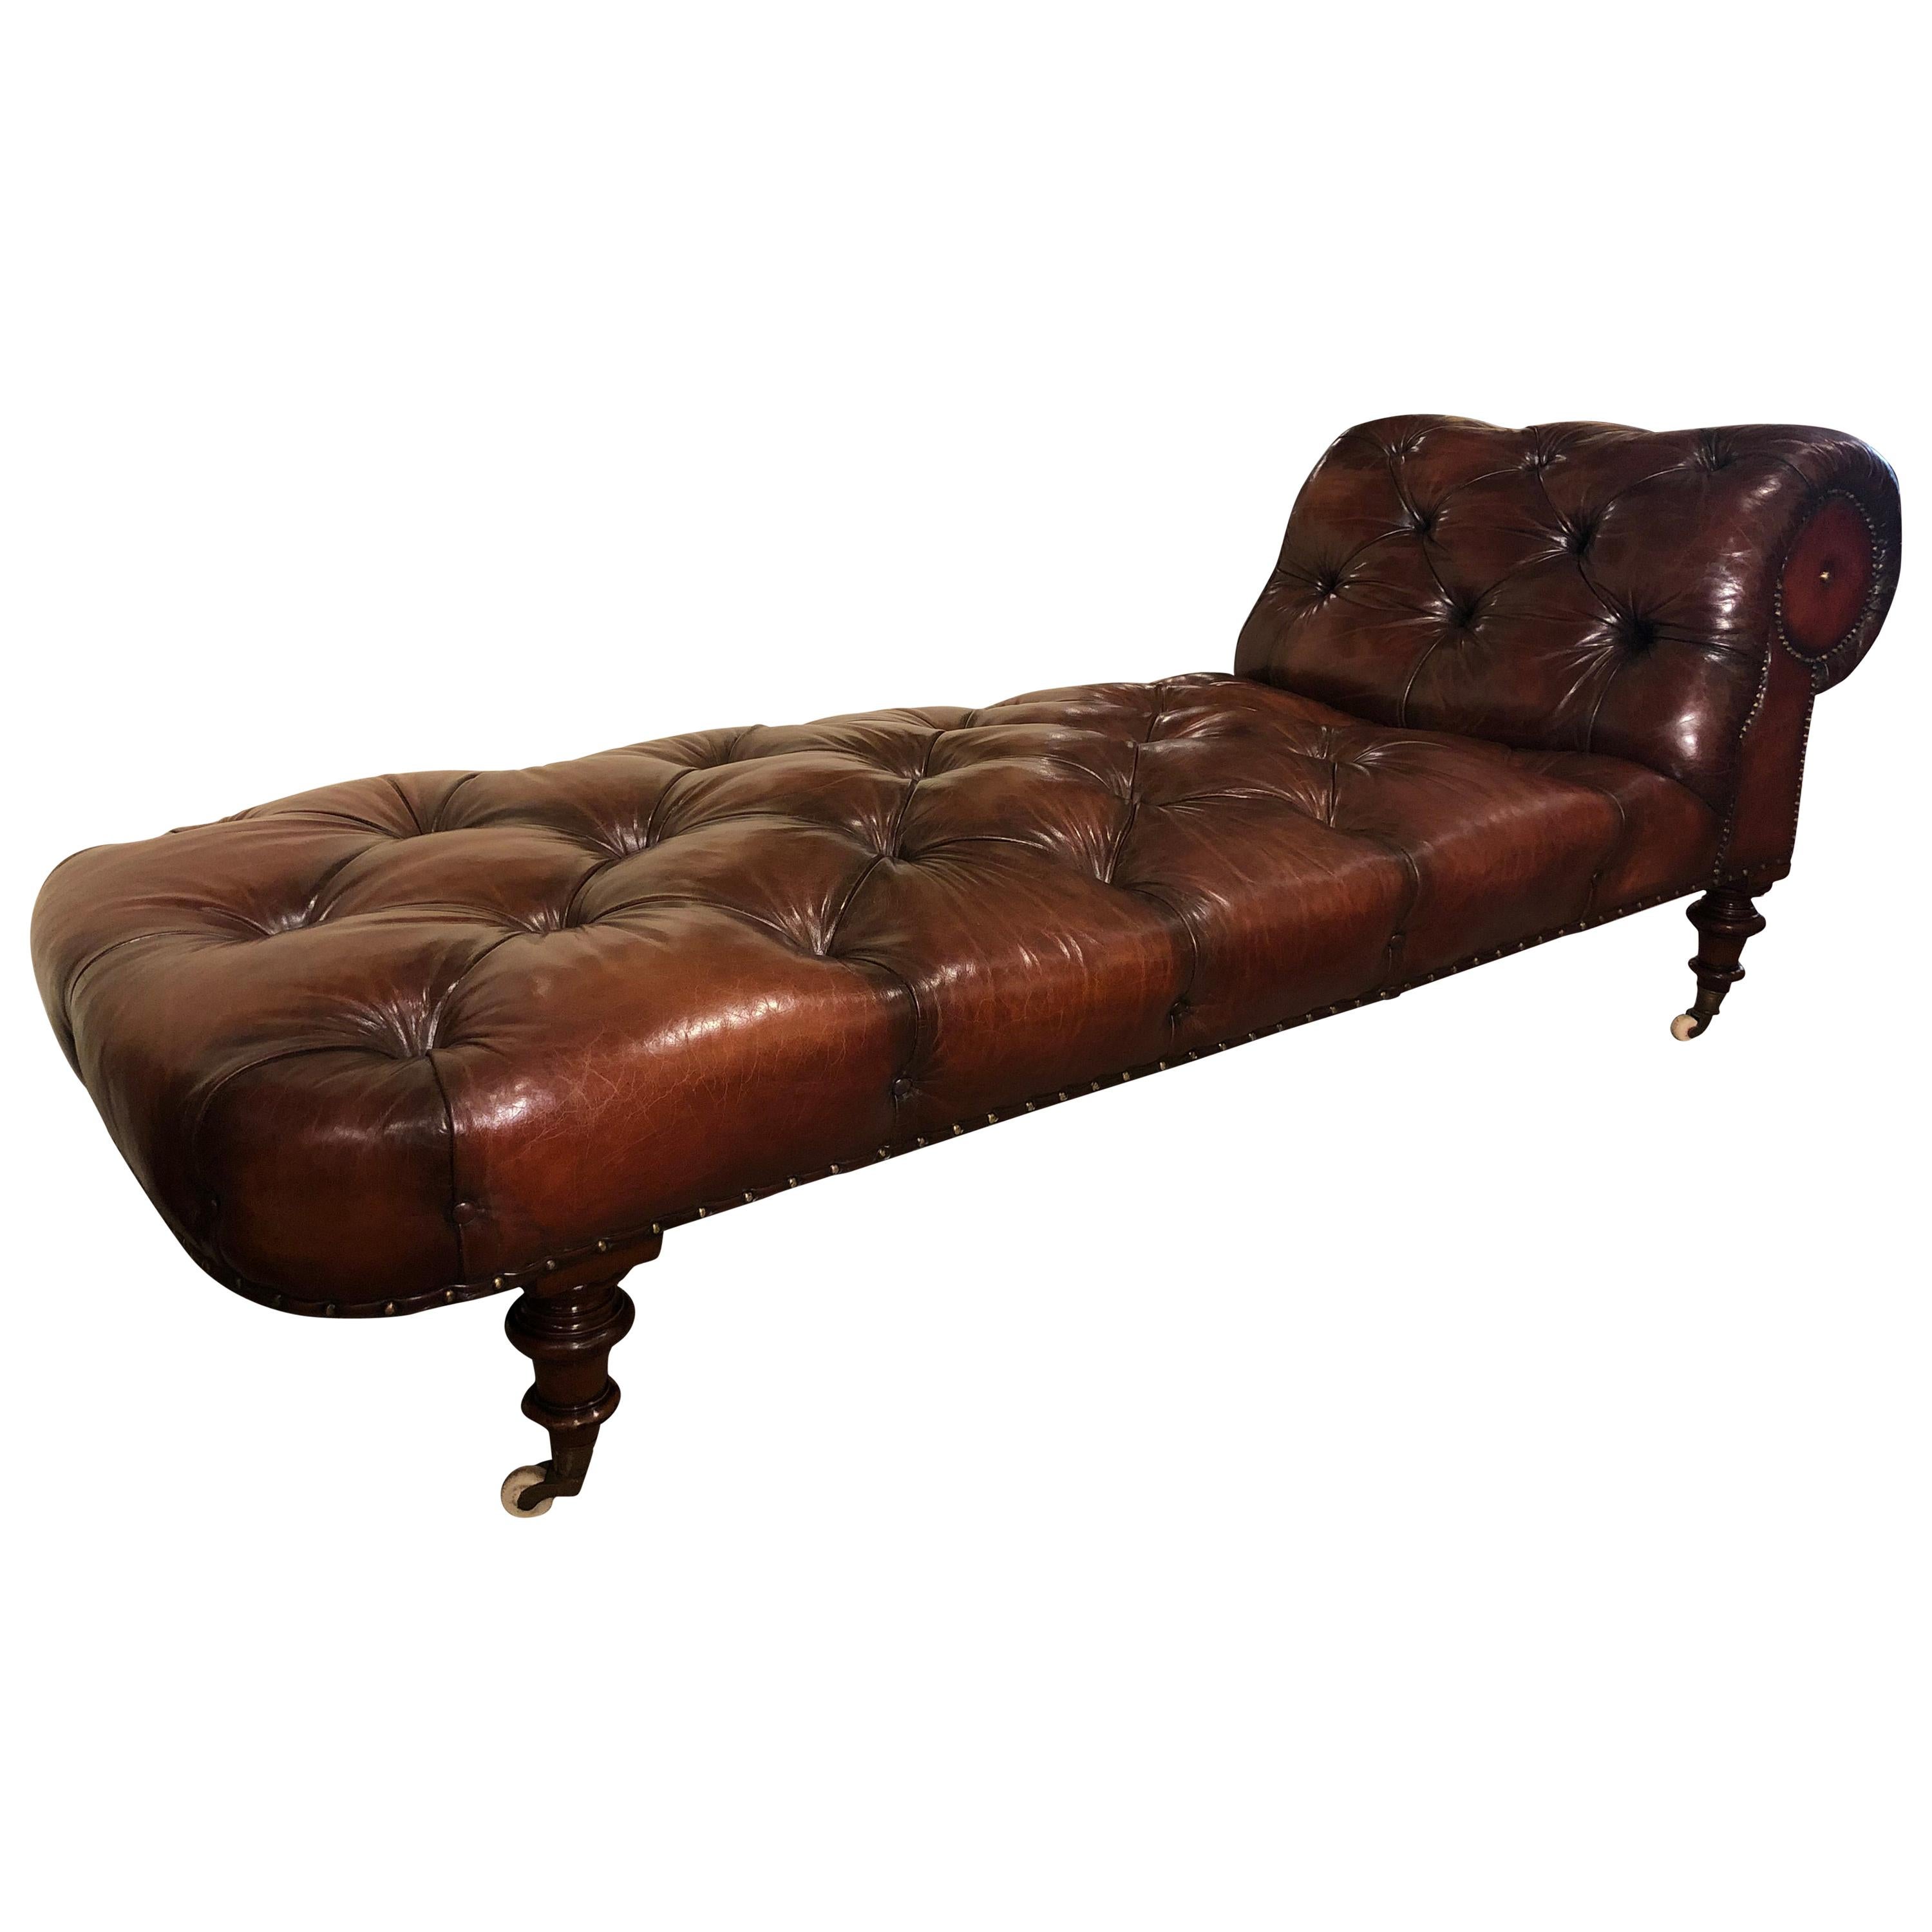 19th Century Walnut Leather Chaise, Leather Chaise Longue